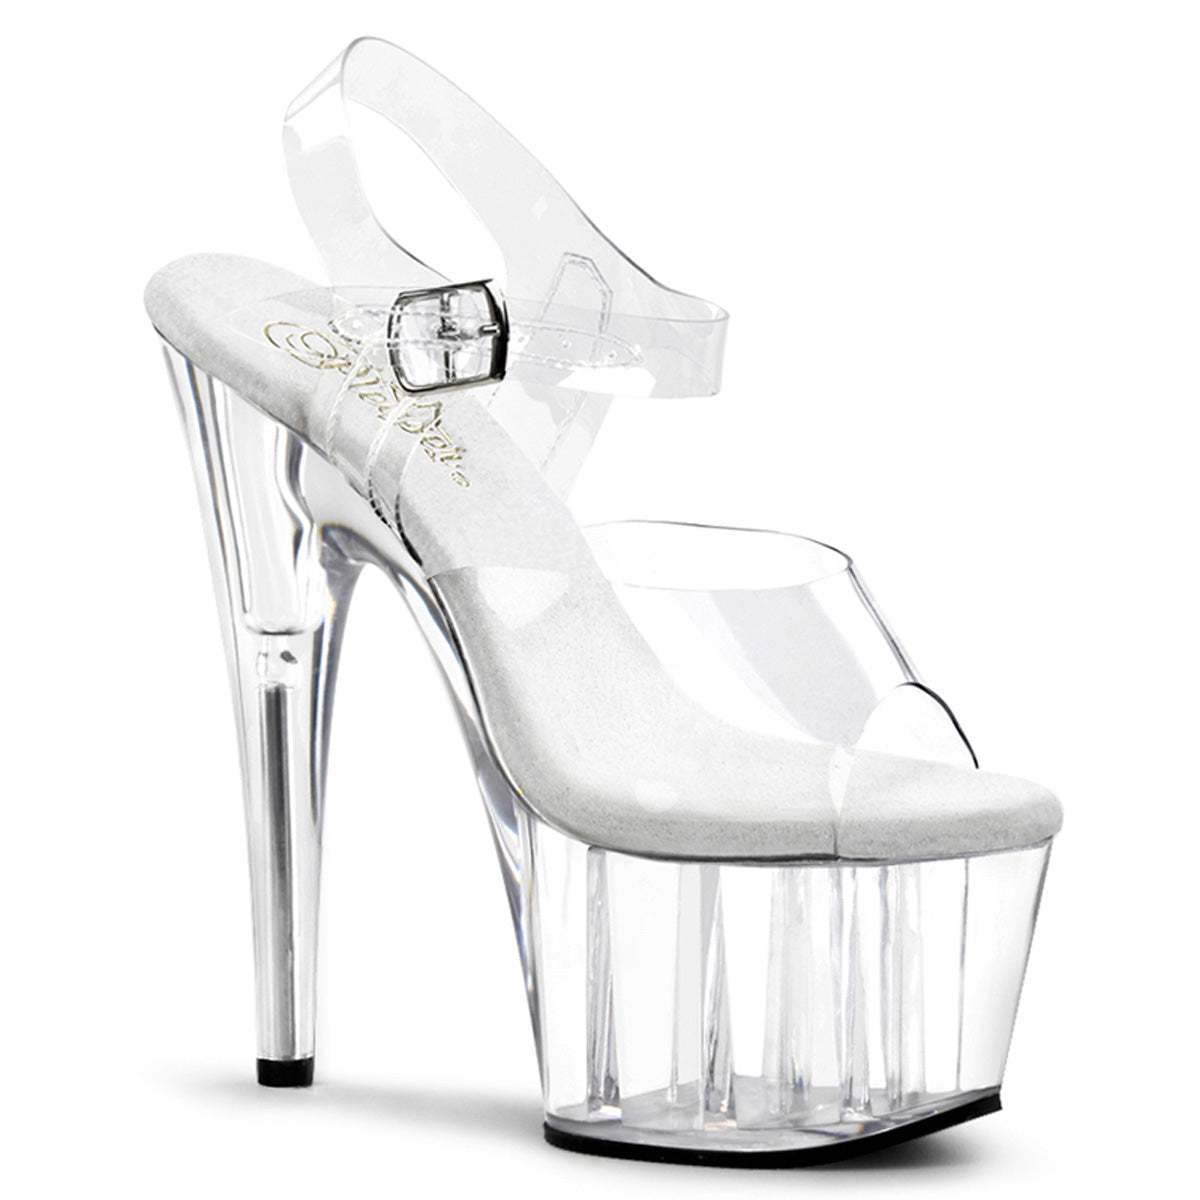 ADORE-708 Clear Ankle Peep Toe High Heel  Multi view 1